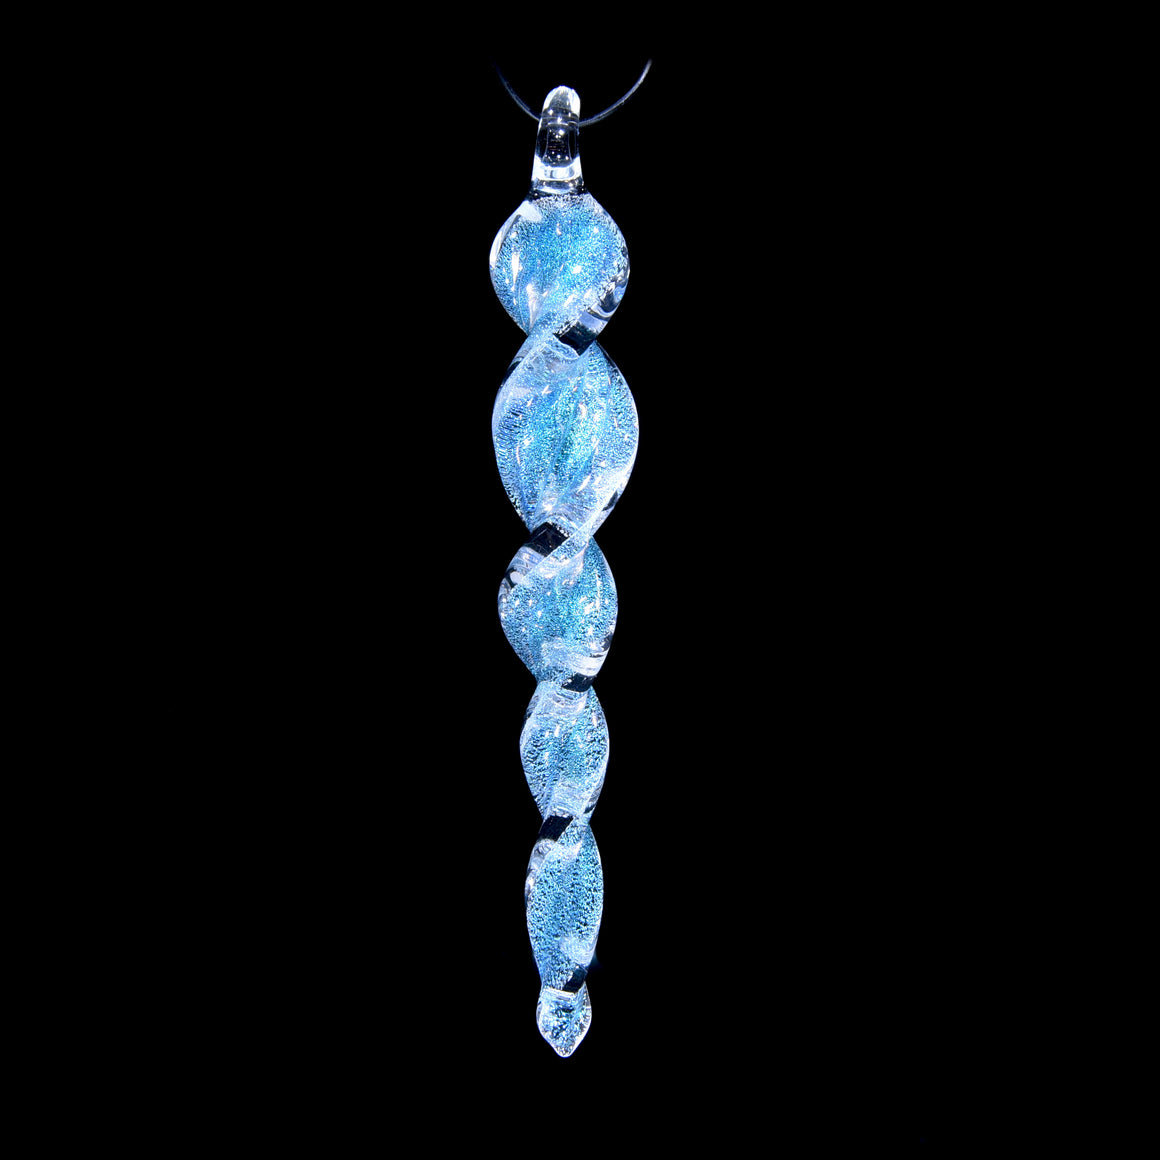 Dichroic Icicle Ornament/Pendant - Full-size